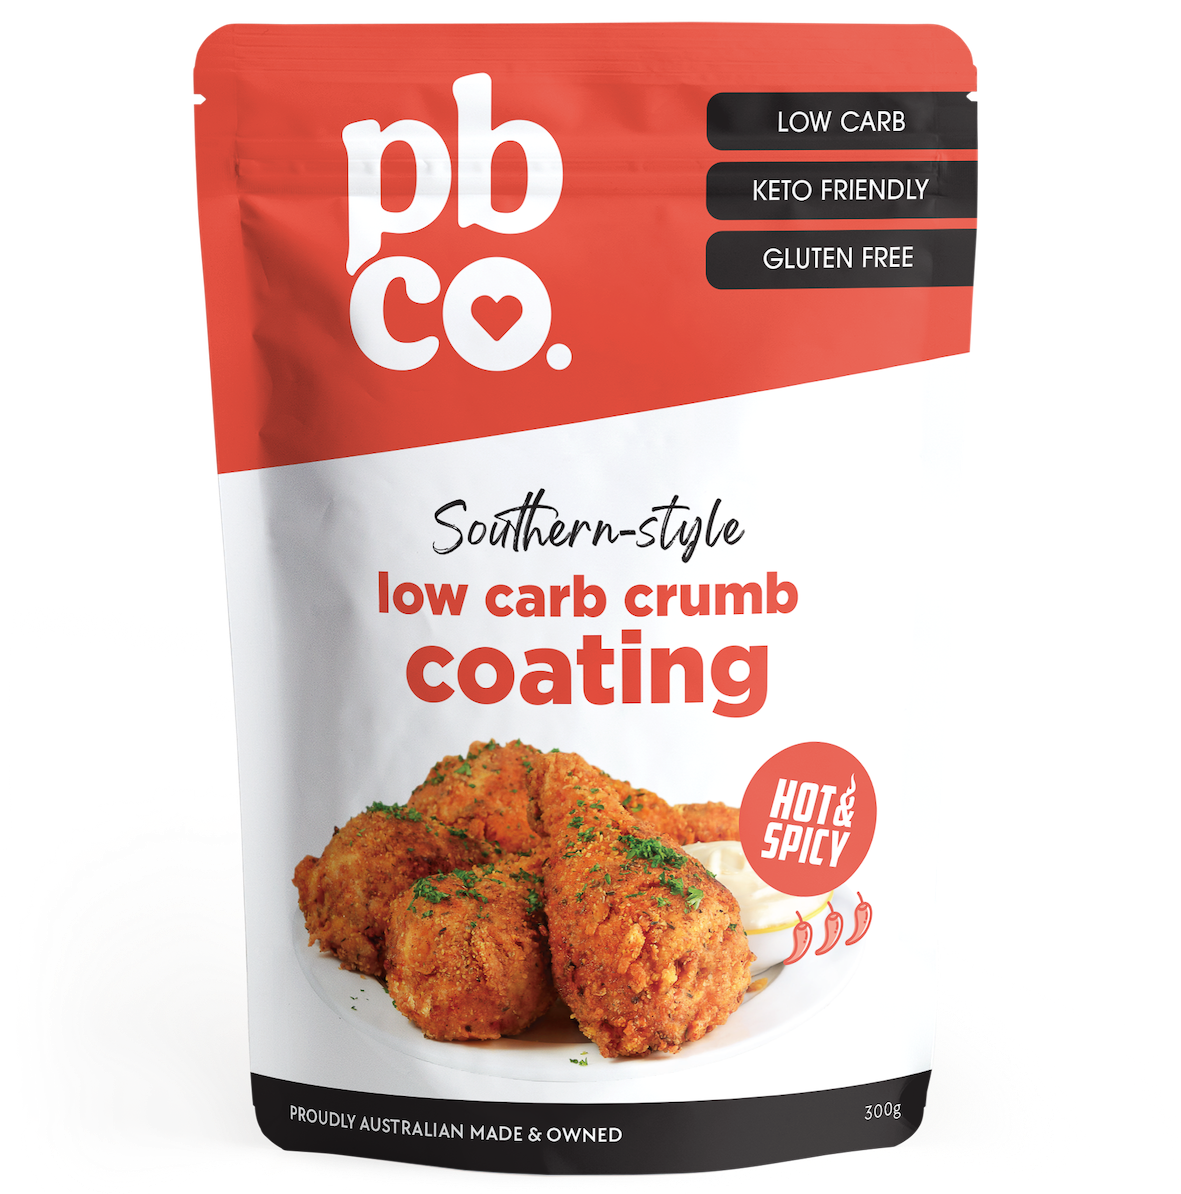 Hot & Spicy Southern-Style Low Carb Crumb Coating - 300g - Low carb & sugar free Pantry Staples - Just $8.95! Shop now at PBCo.